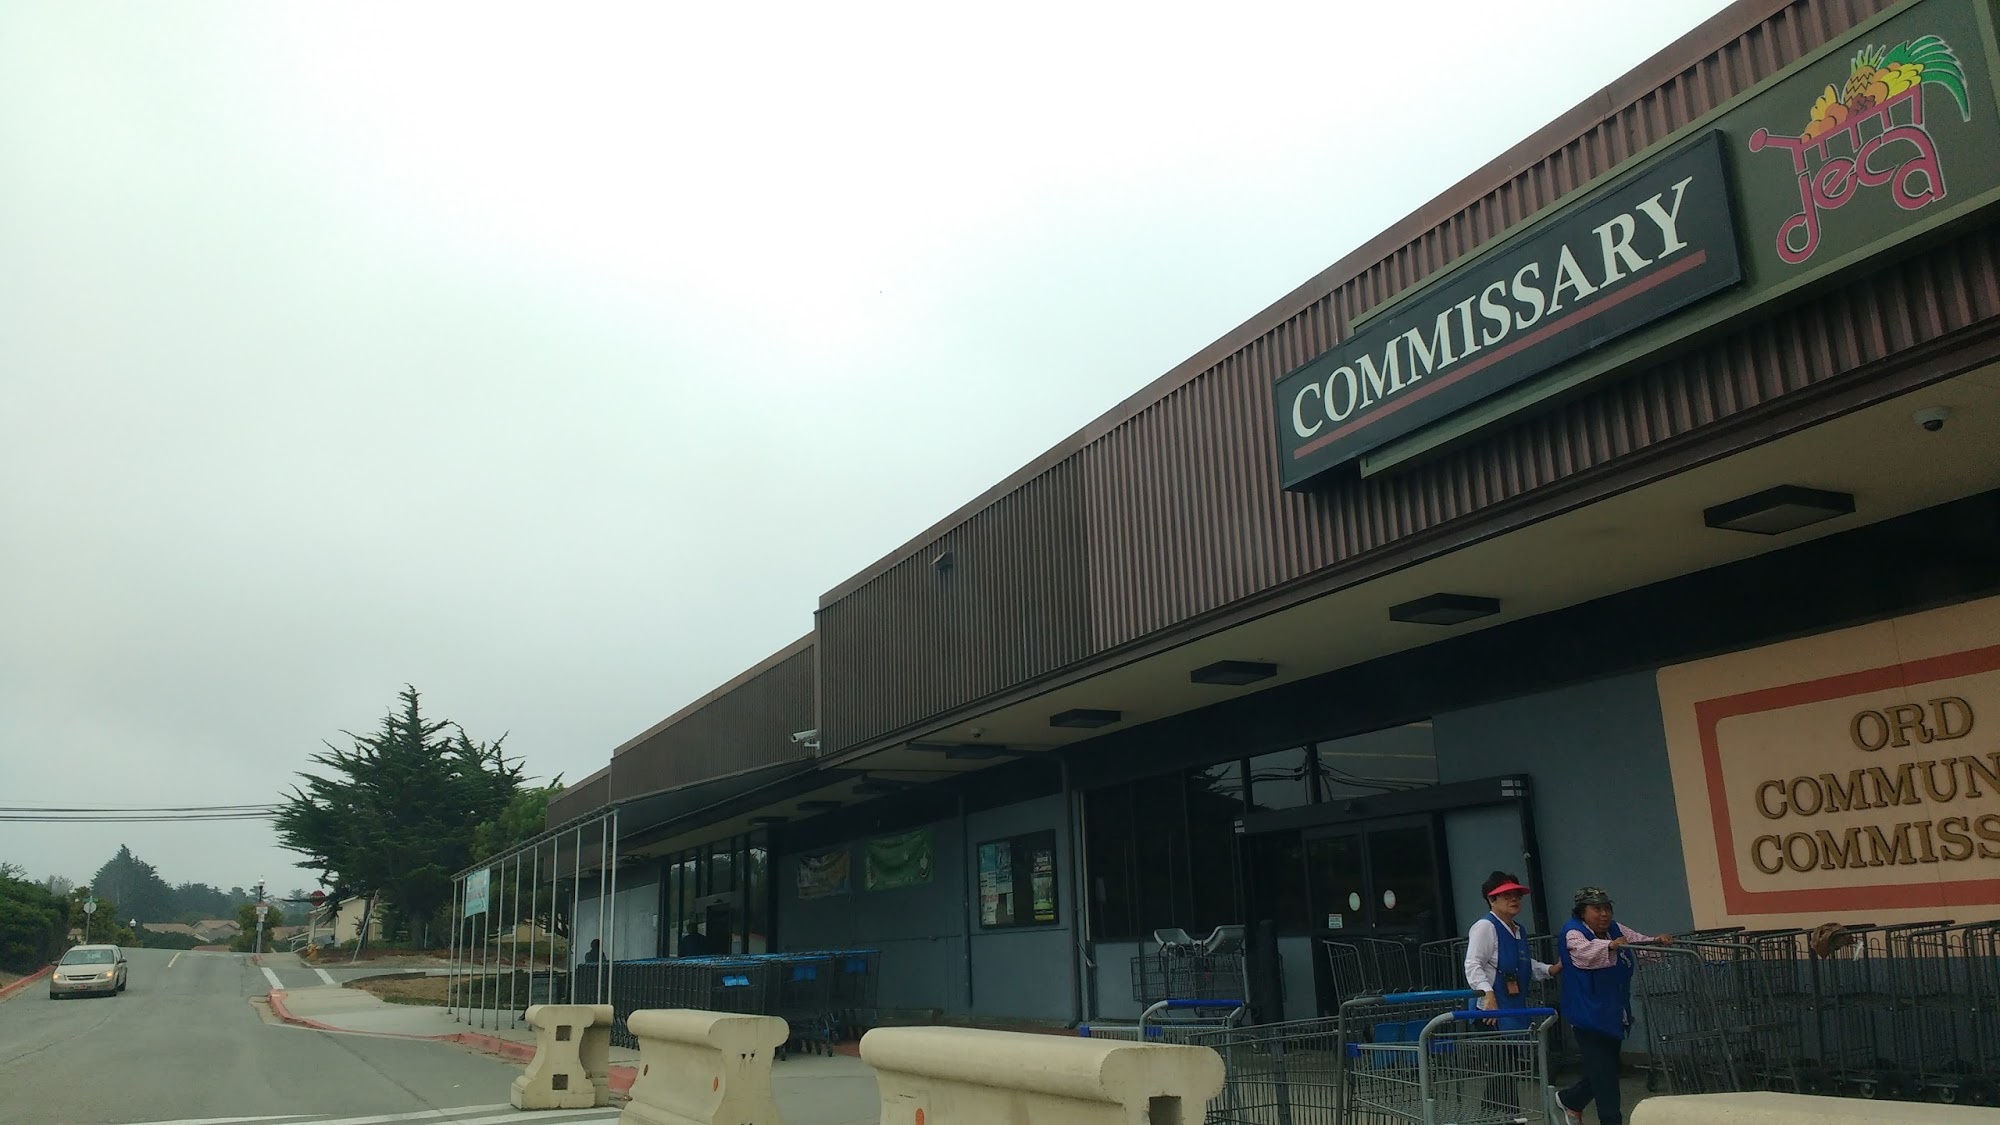 Ord Community Commissary